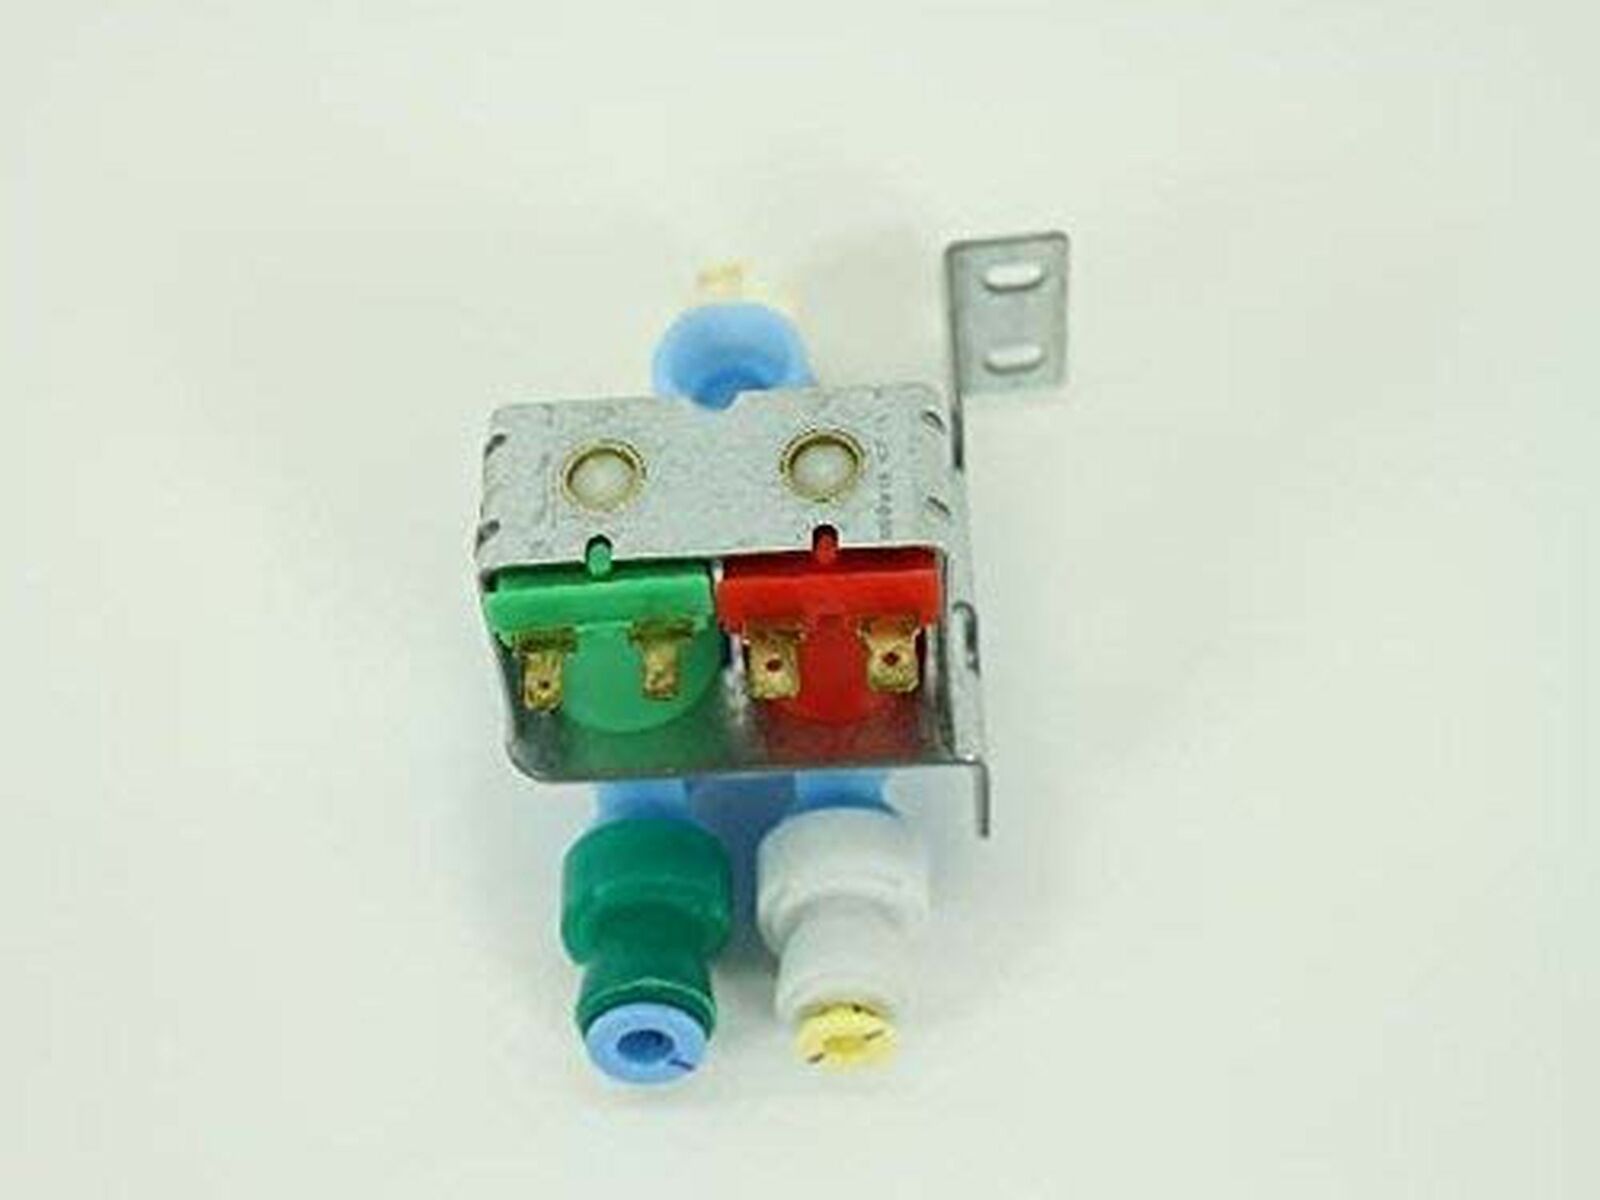 Global Products Refrigerator Water Inlet Valve Compatible with KitchenAid PS1... Obfite nowe prace